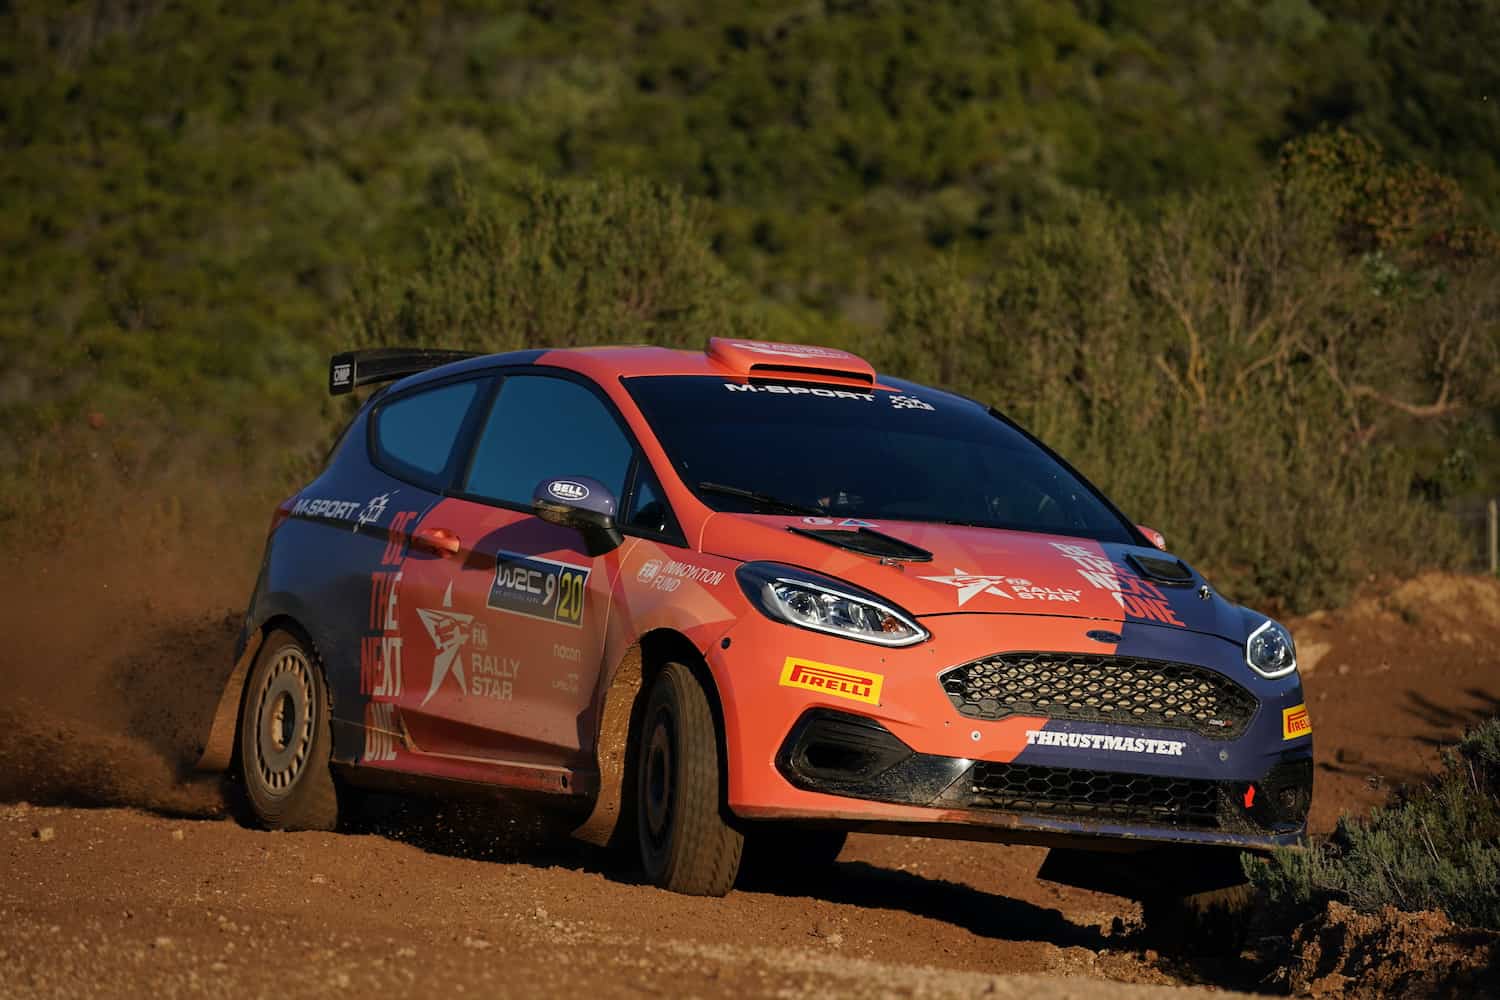 FIA Rally Star competition